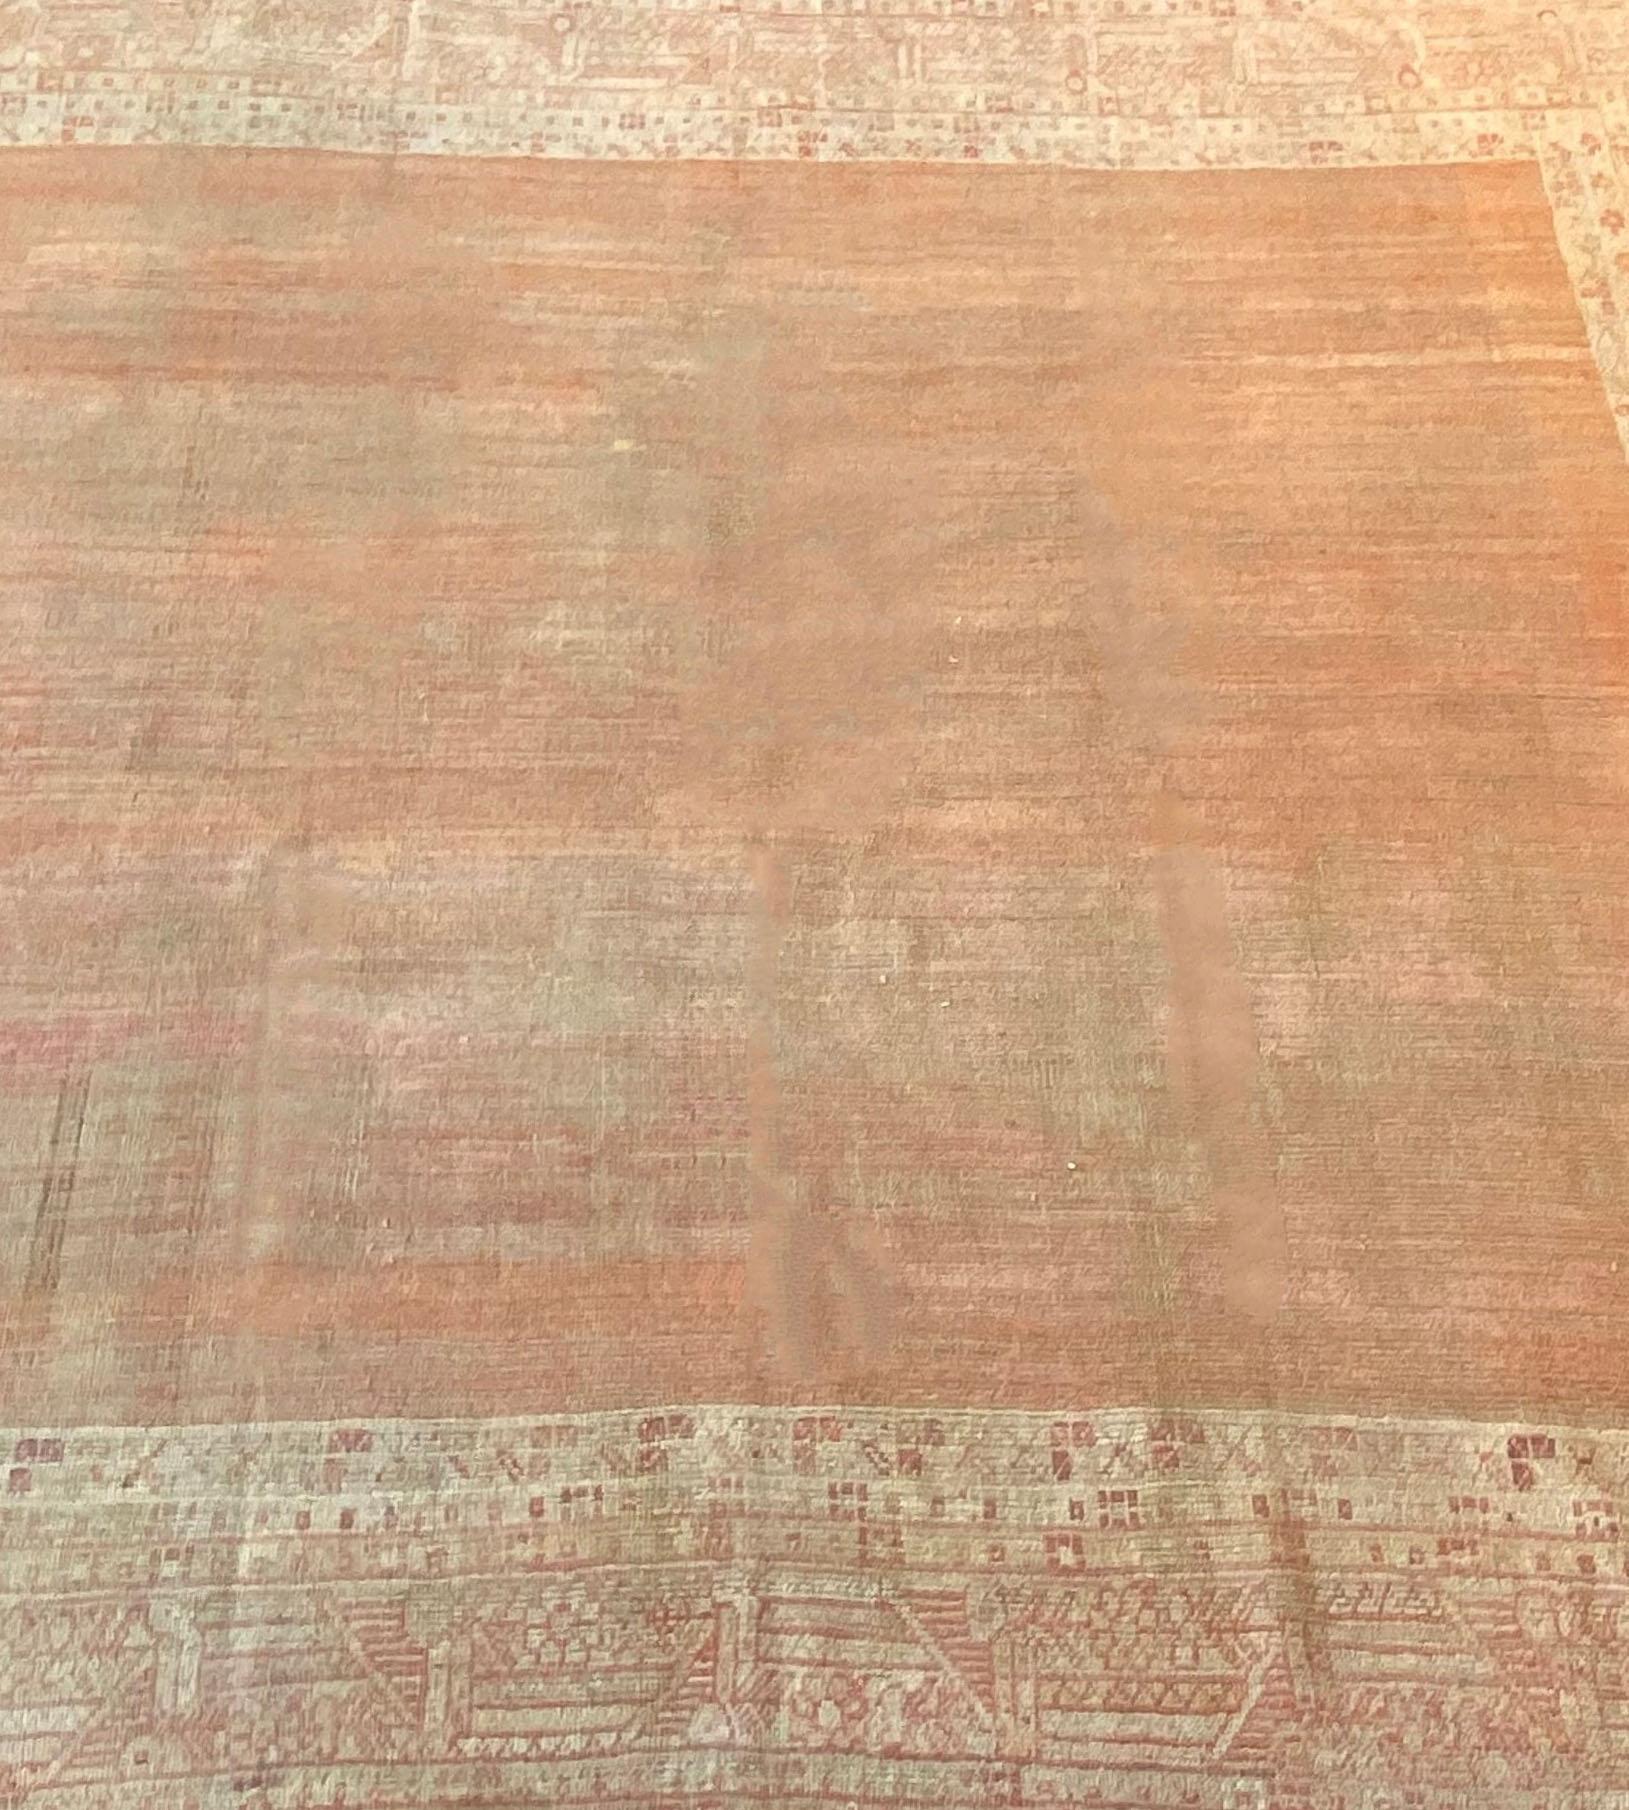 Turkish Handwoven Antique Oushak Rug from the Late 19th Century For Sale